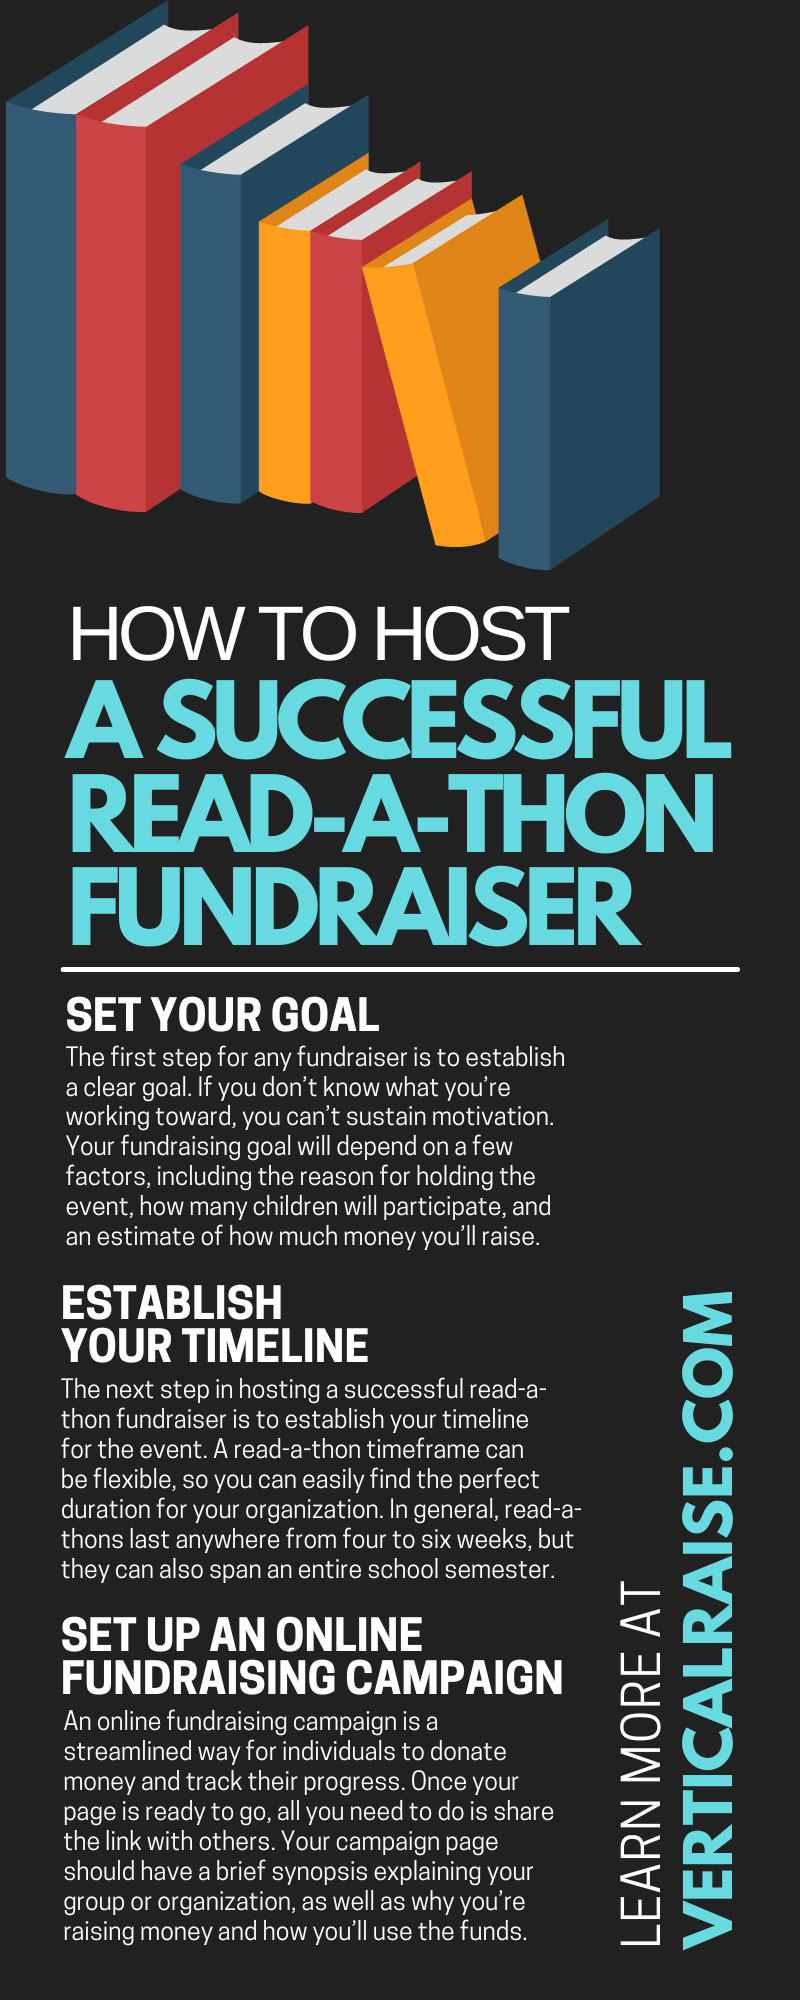 How To Host a Successful Read-a-thon Fundraiser